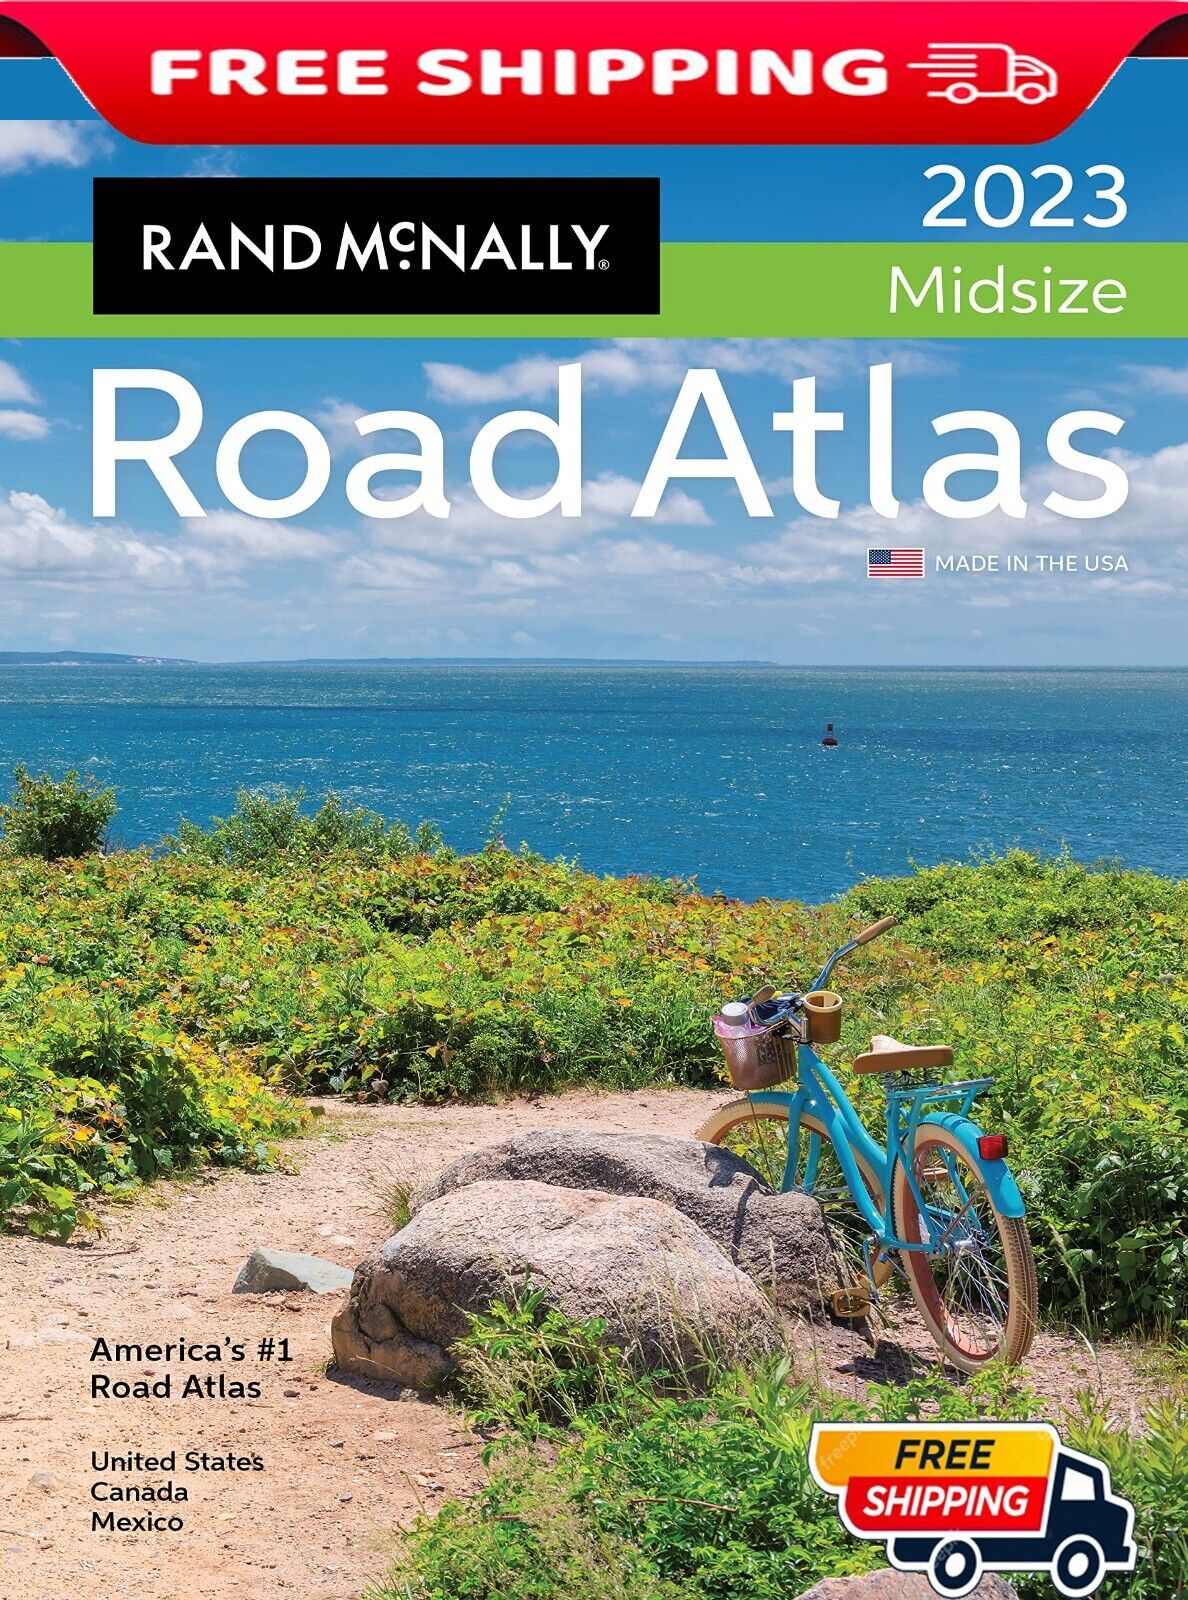 Rand Mcnally USA Road Atlas 2023 BEST Large Scale Travel Maps USA Midsize NEW